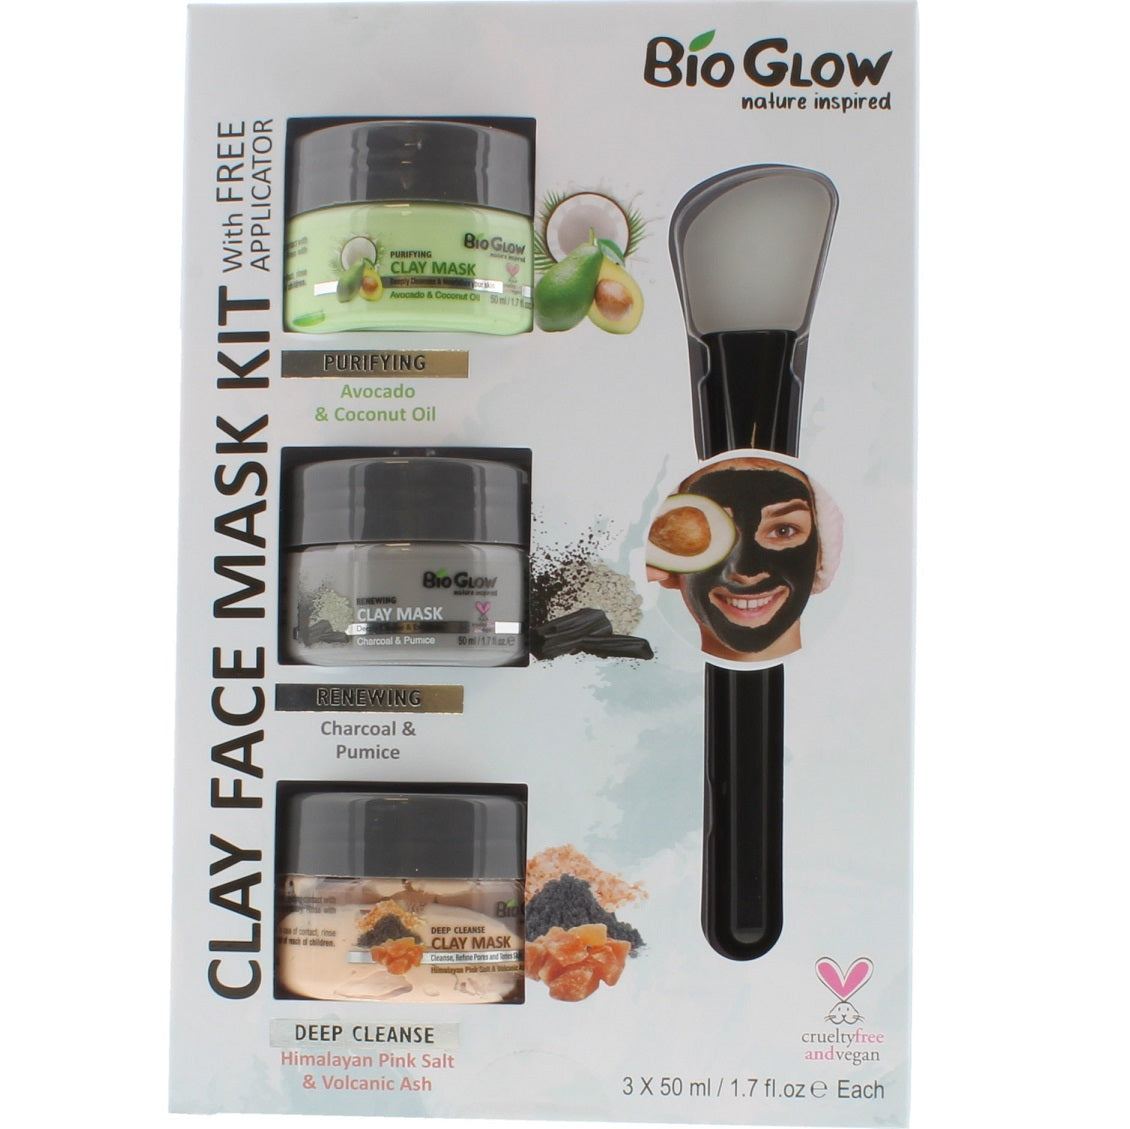 Bio Glow Clay Face Mask Kit with Applicator Gift Set